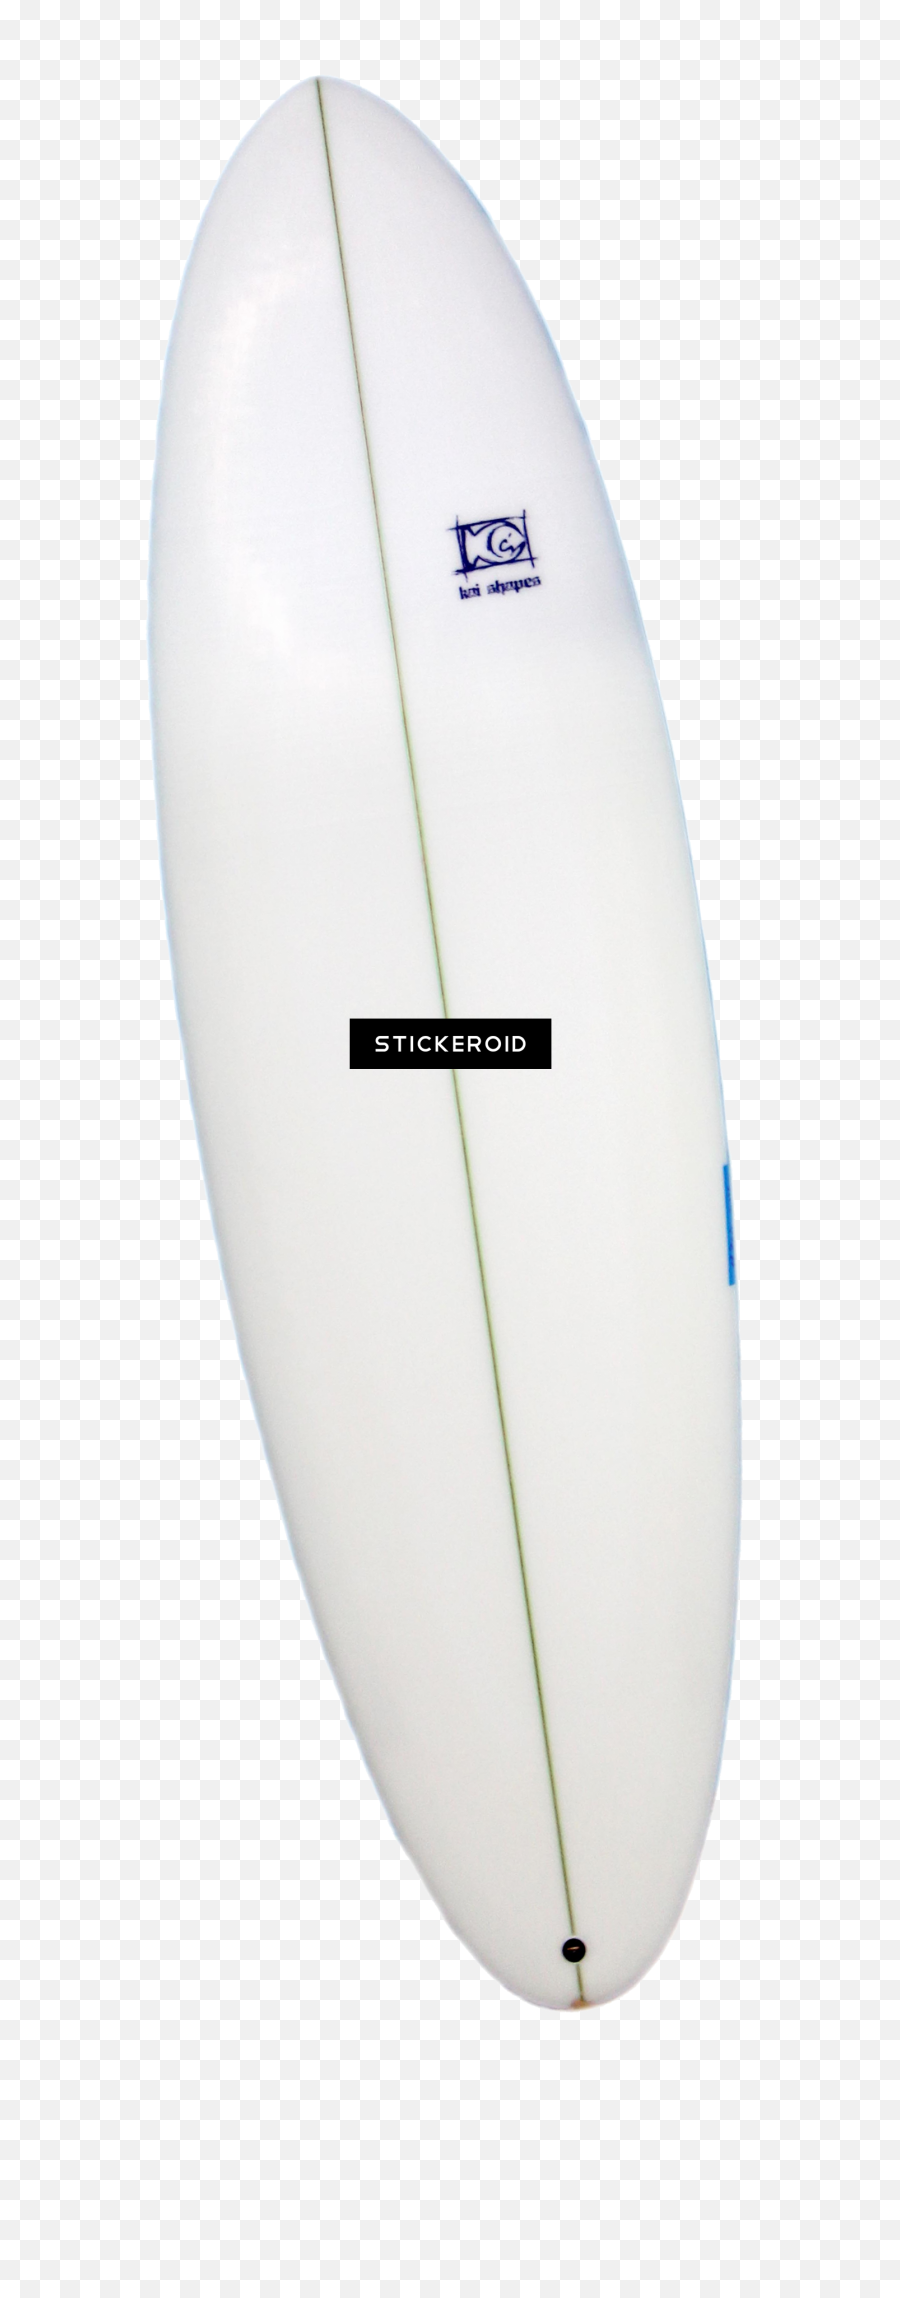 Surfboard Png Image With No Background - Haydenshapes Surfboards,Surf Board Png